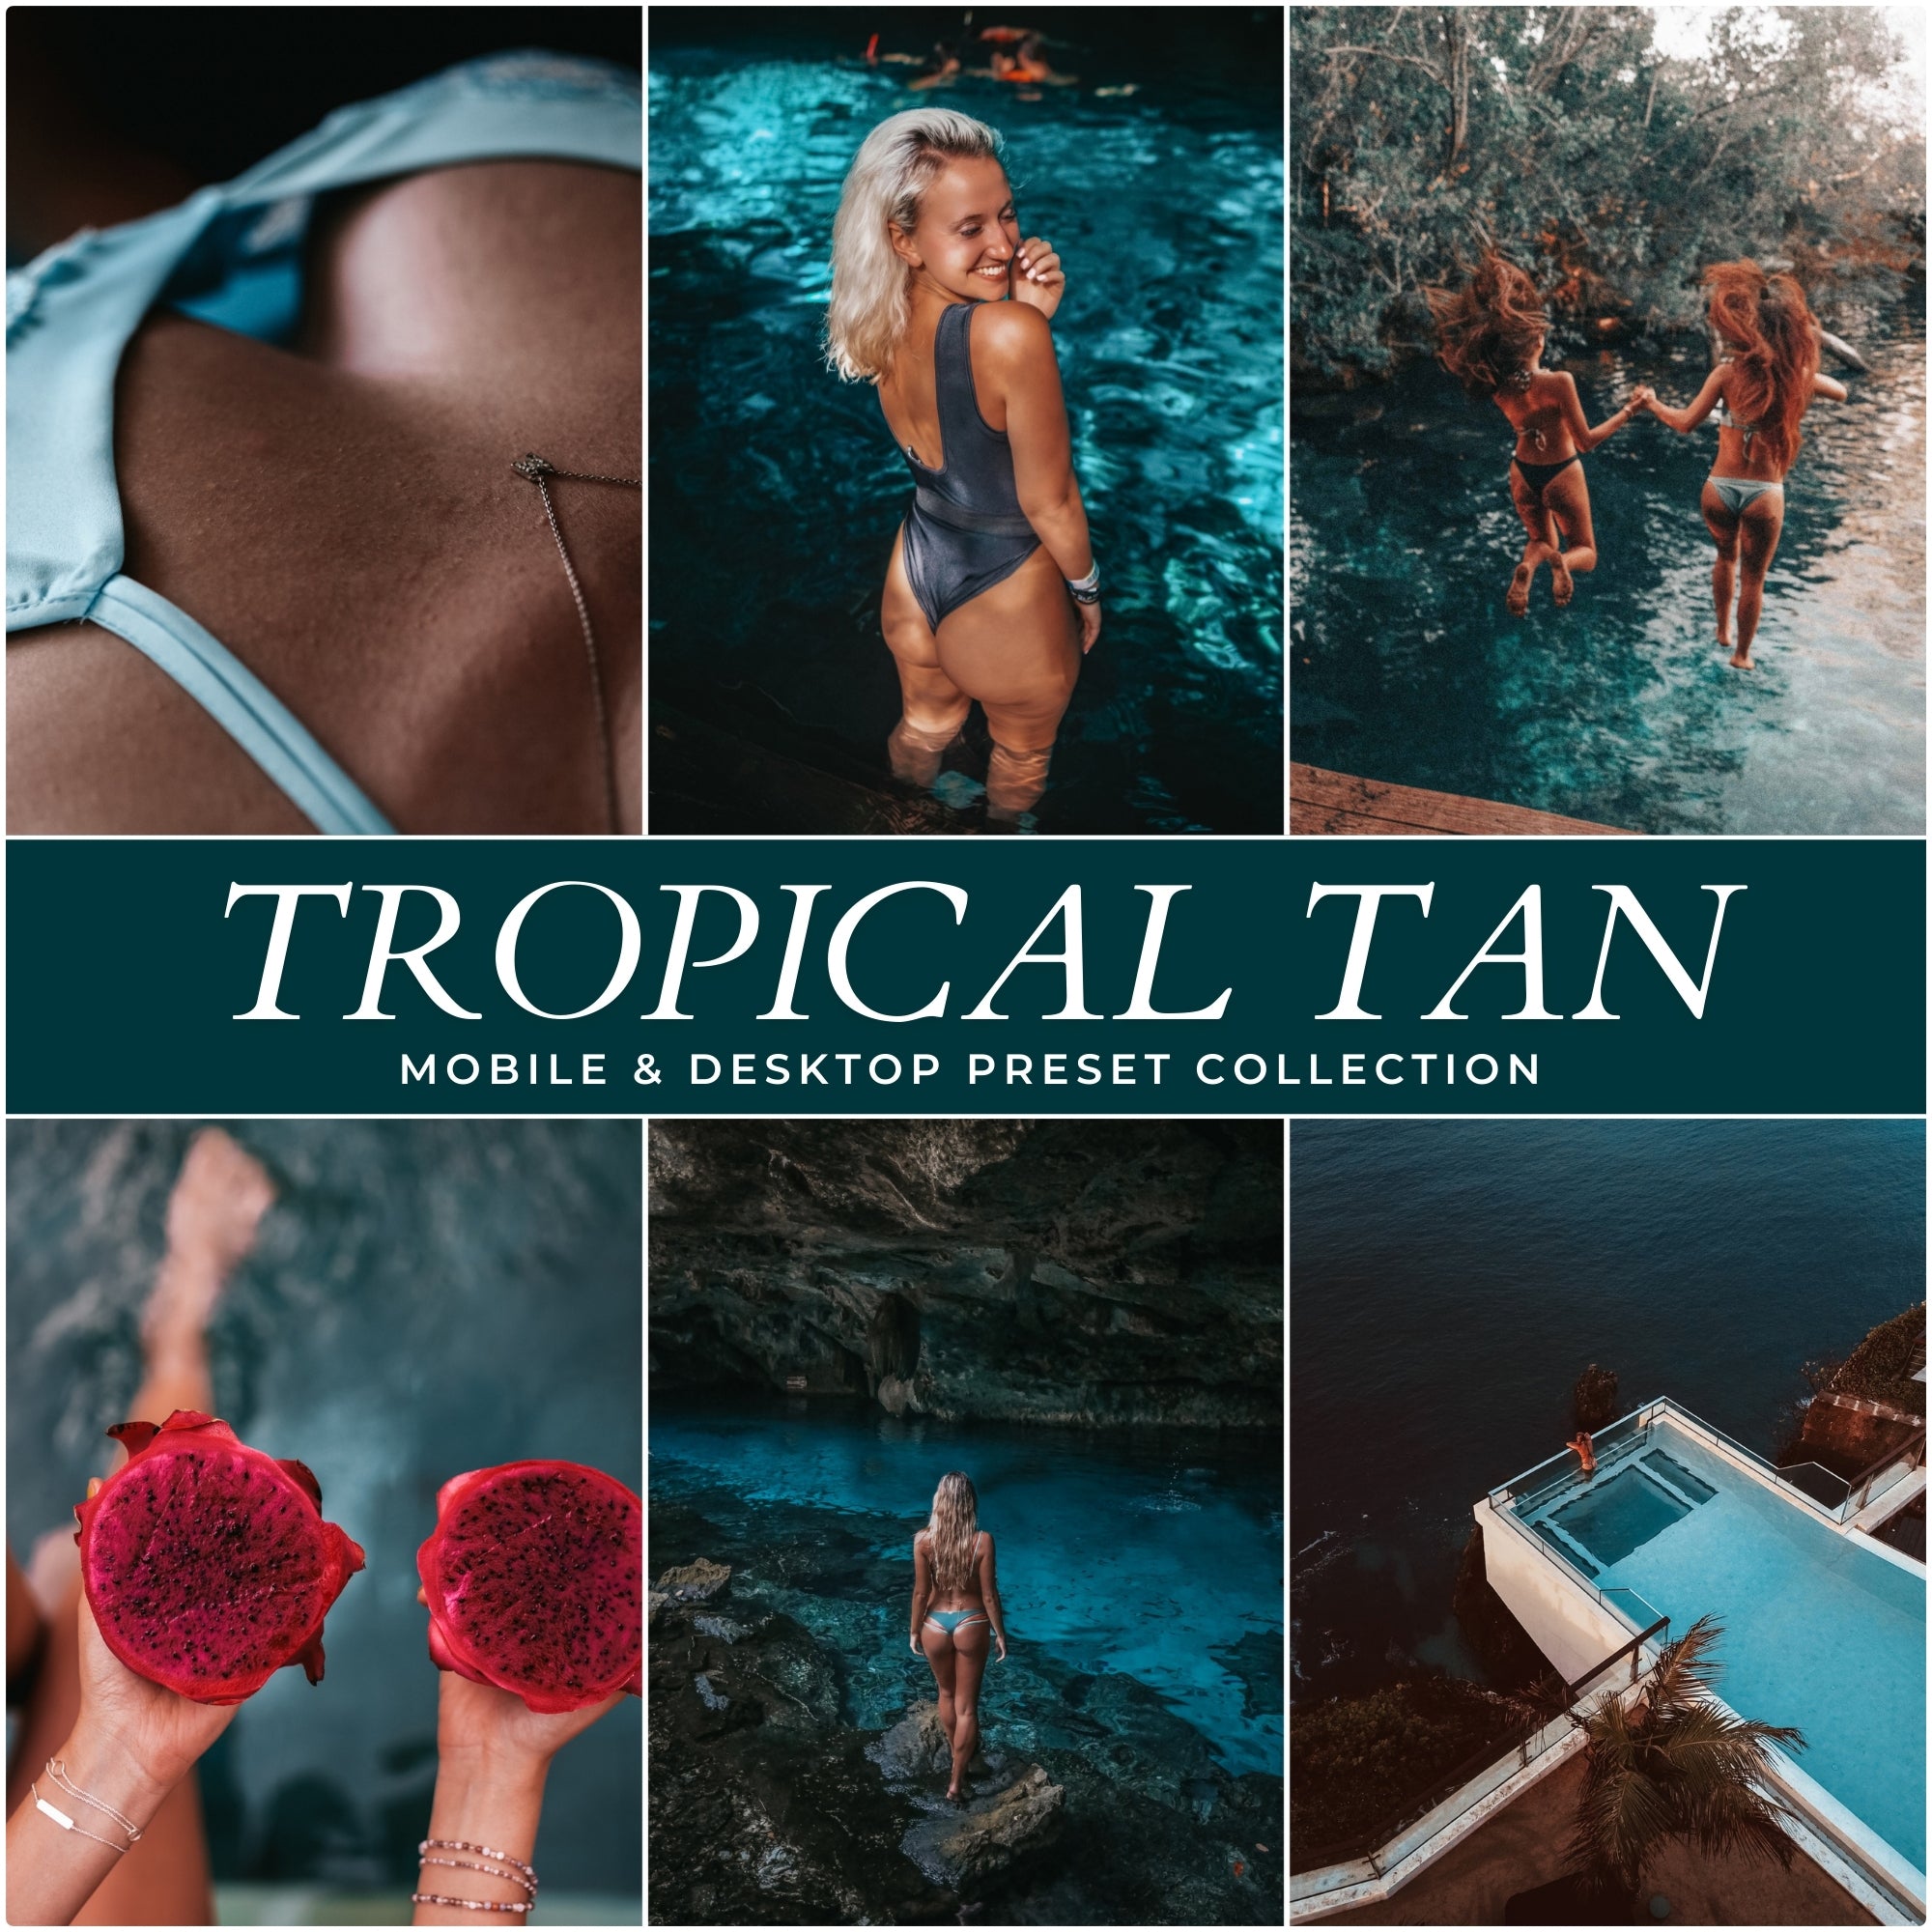 Tropical Tan Lightroom Presets For Photographers and Instagram Influencers Photo Editing In Adobe Lightroom By Lou And Marks Presets